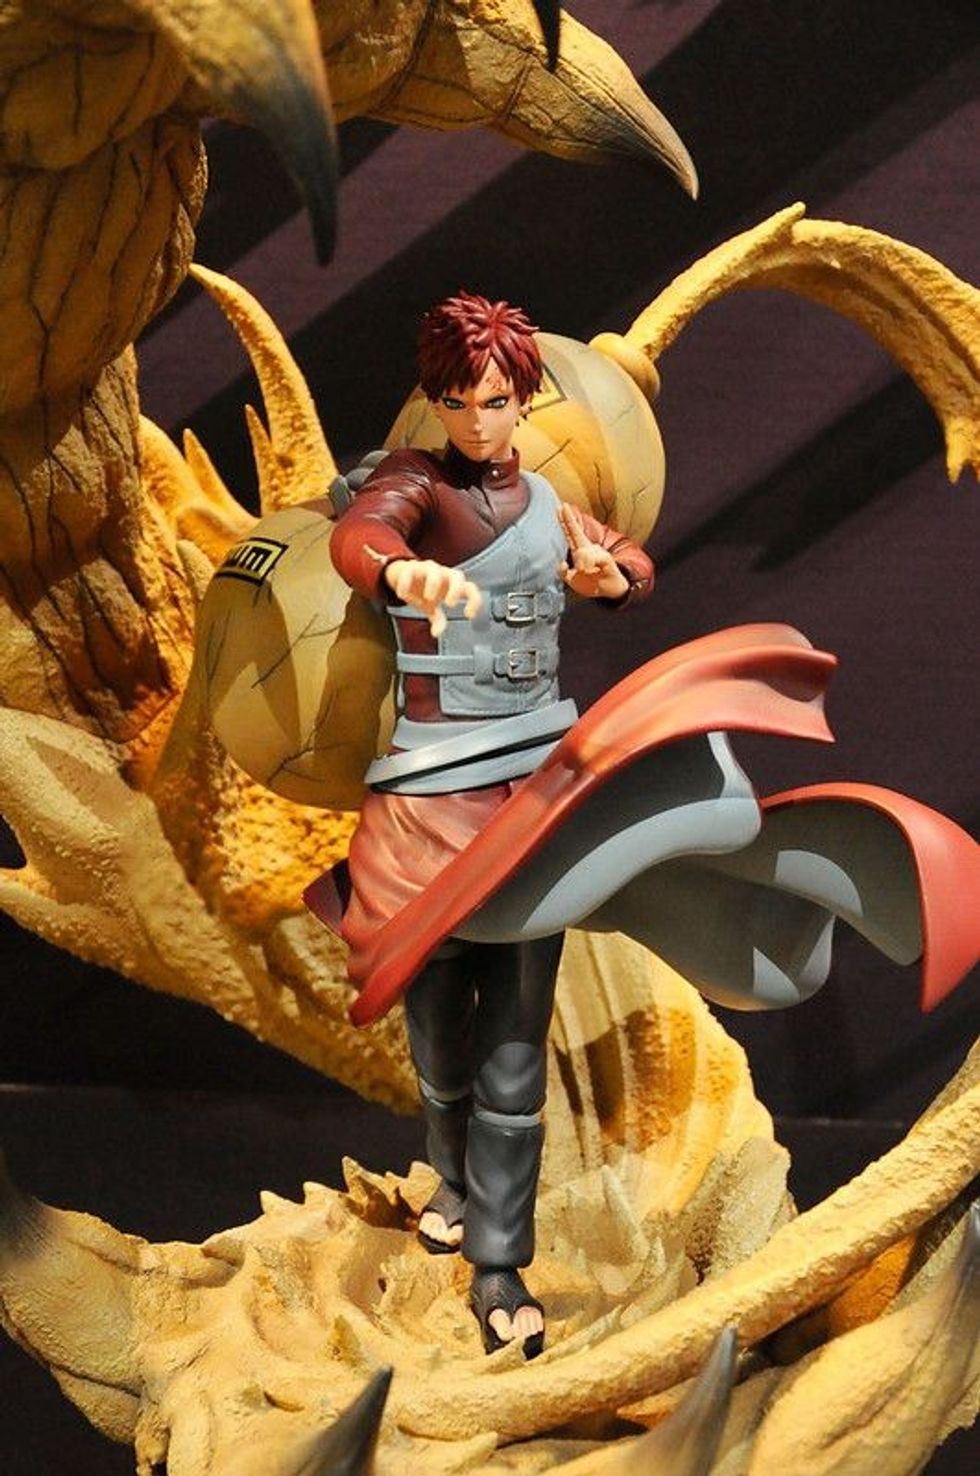 Anime character "Gaara" in action